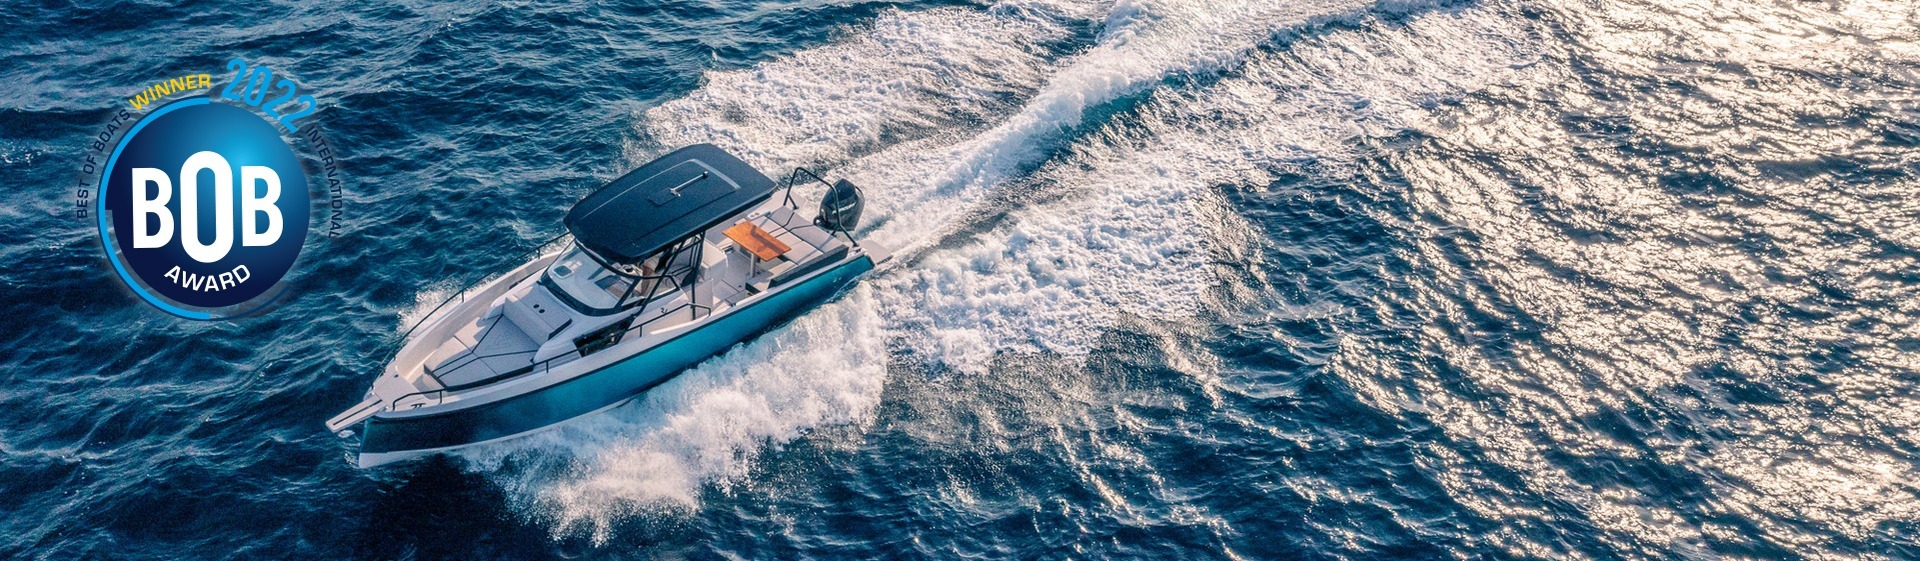 Ryck 280 with outboard engine and large sun baiting dec,k and dining table at its stern speeds across the ocean